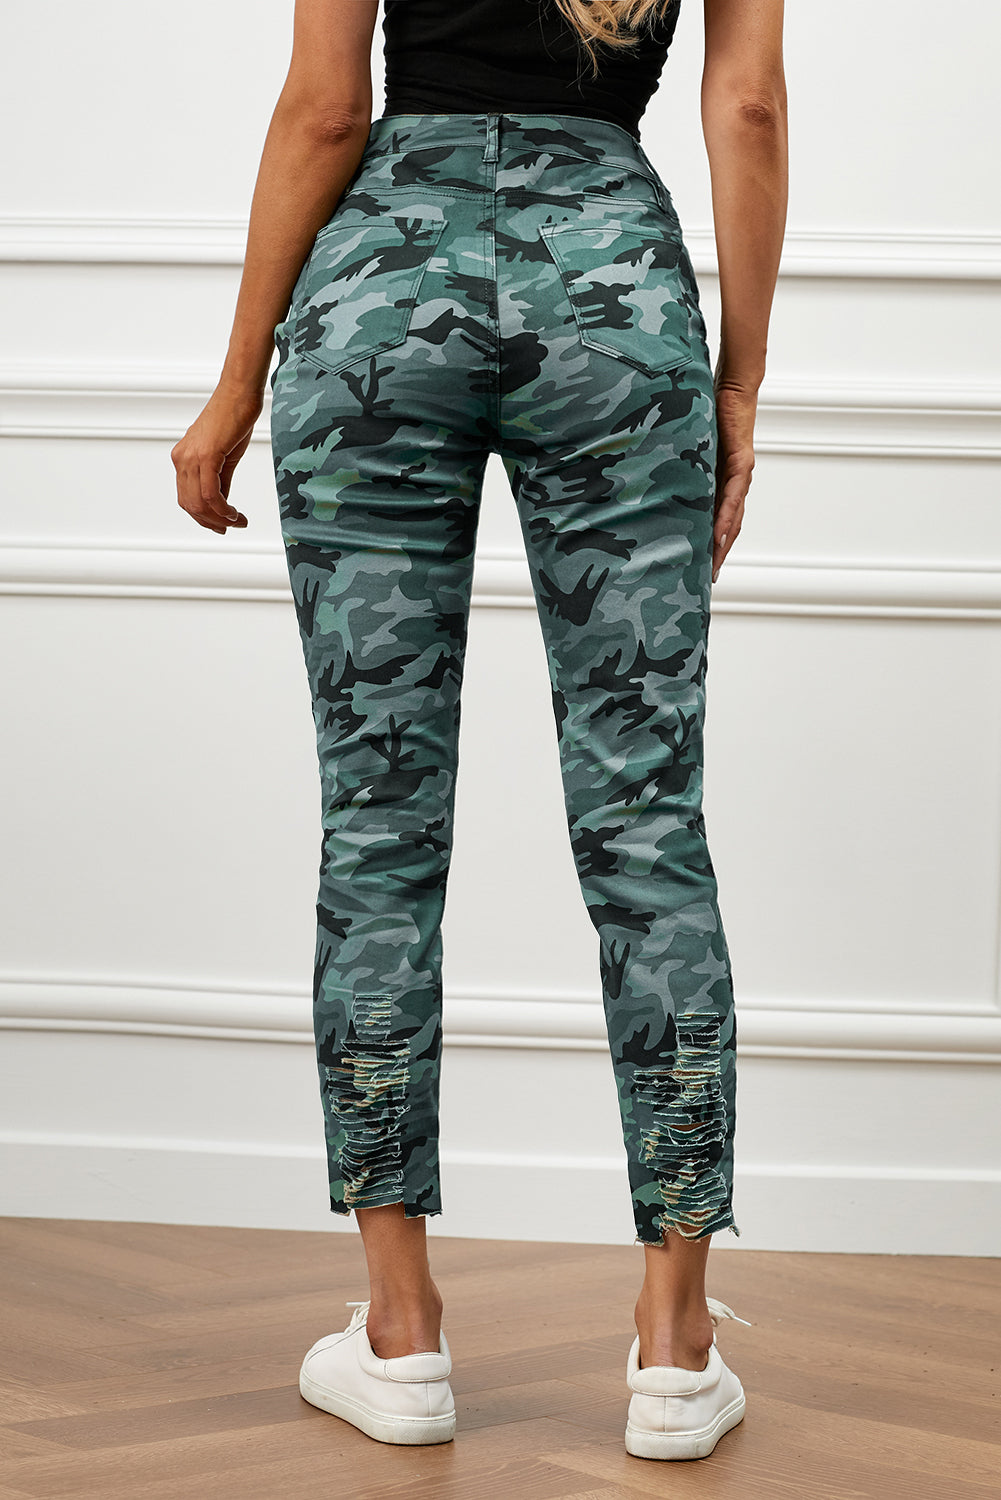 Camouflage Jeans